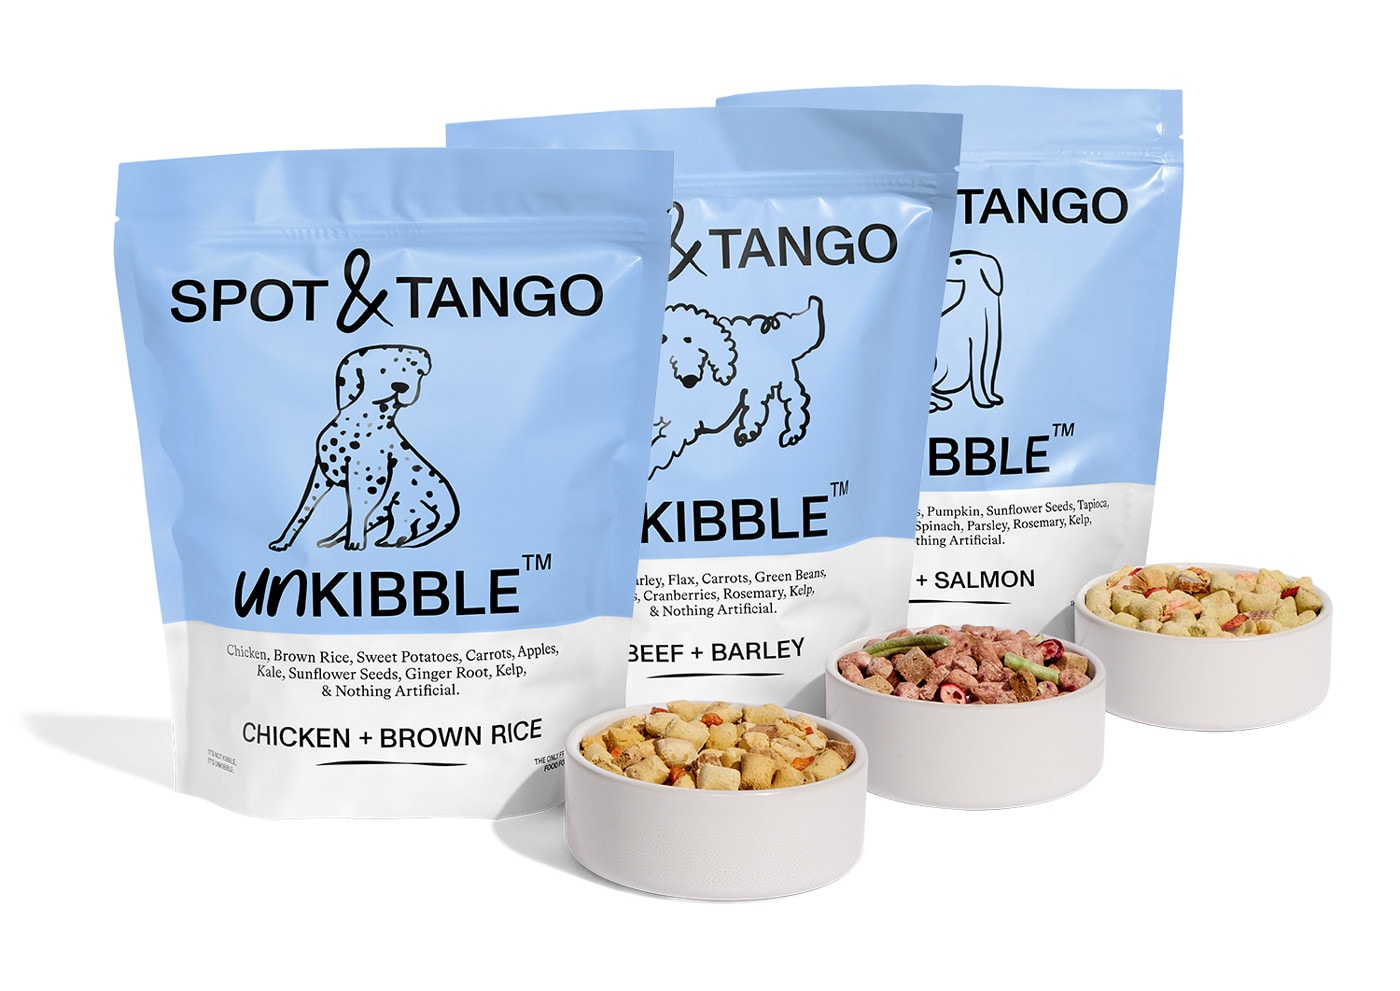 Spot & Tango Unkibble products